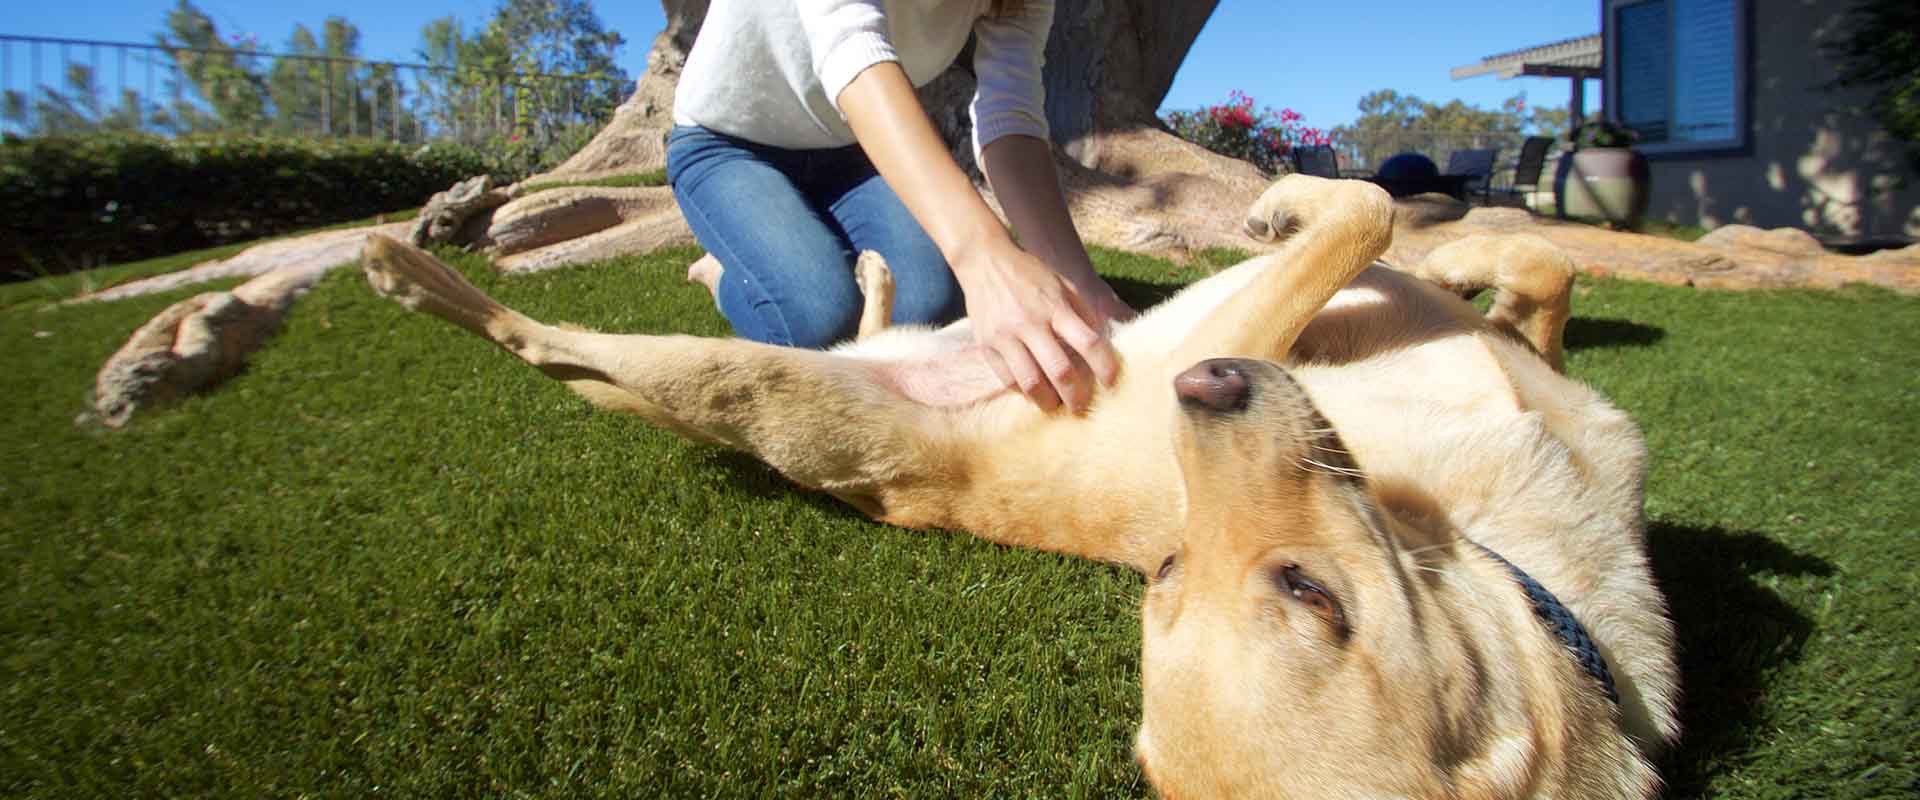 Pet Safe artificial grass for your dog and family by SYNLawn of Georgia